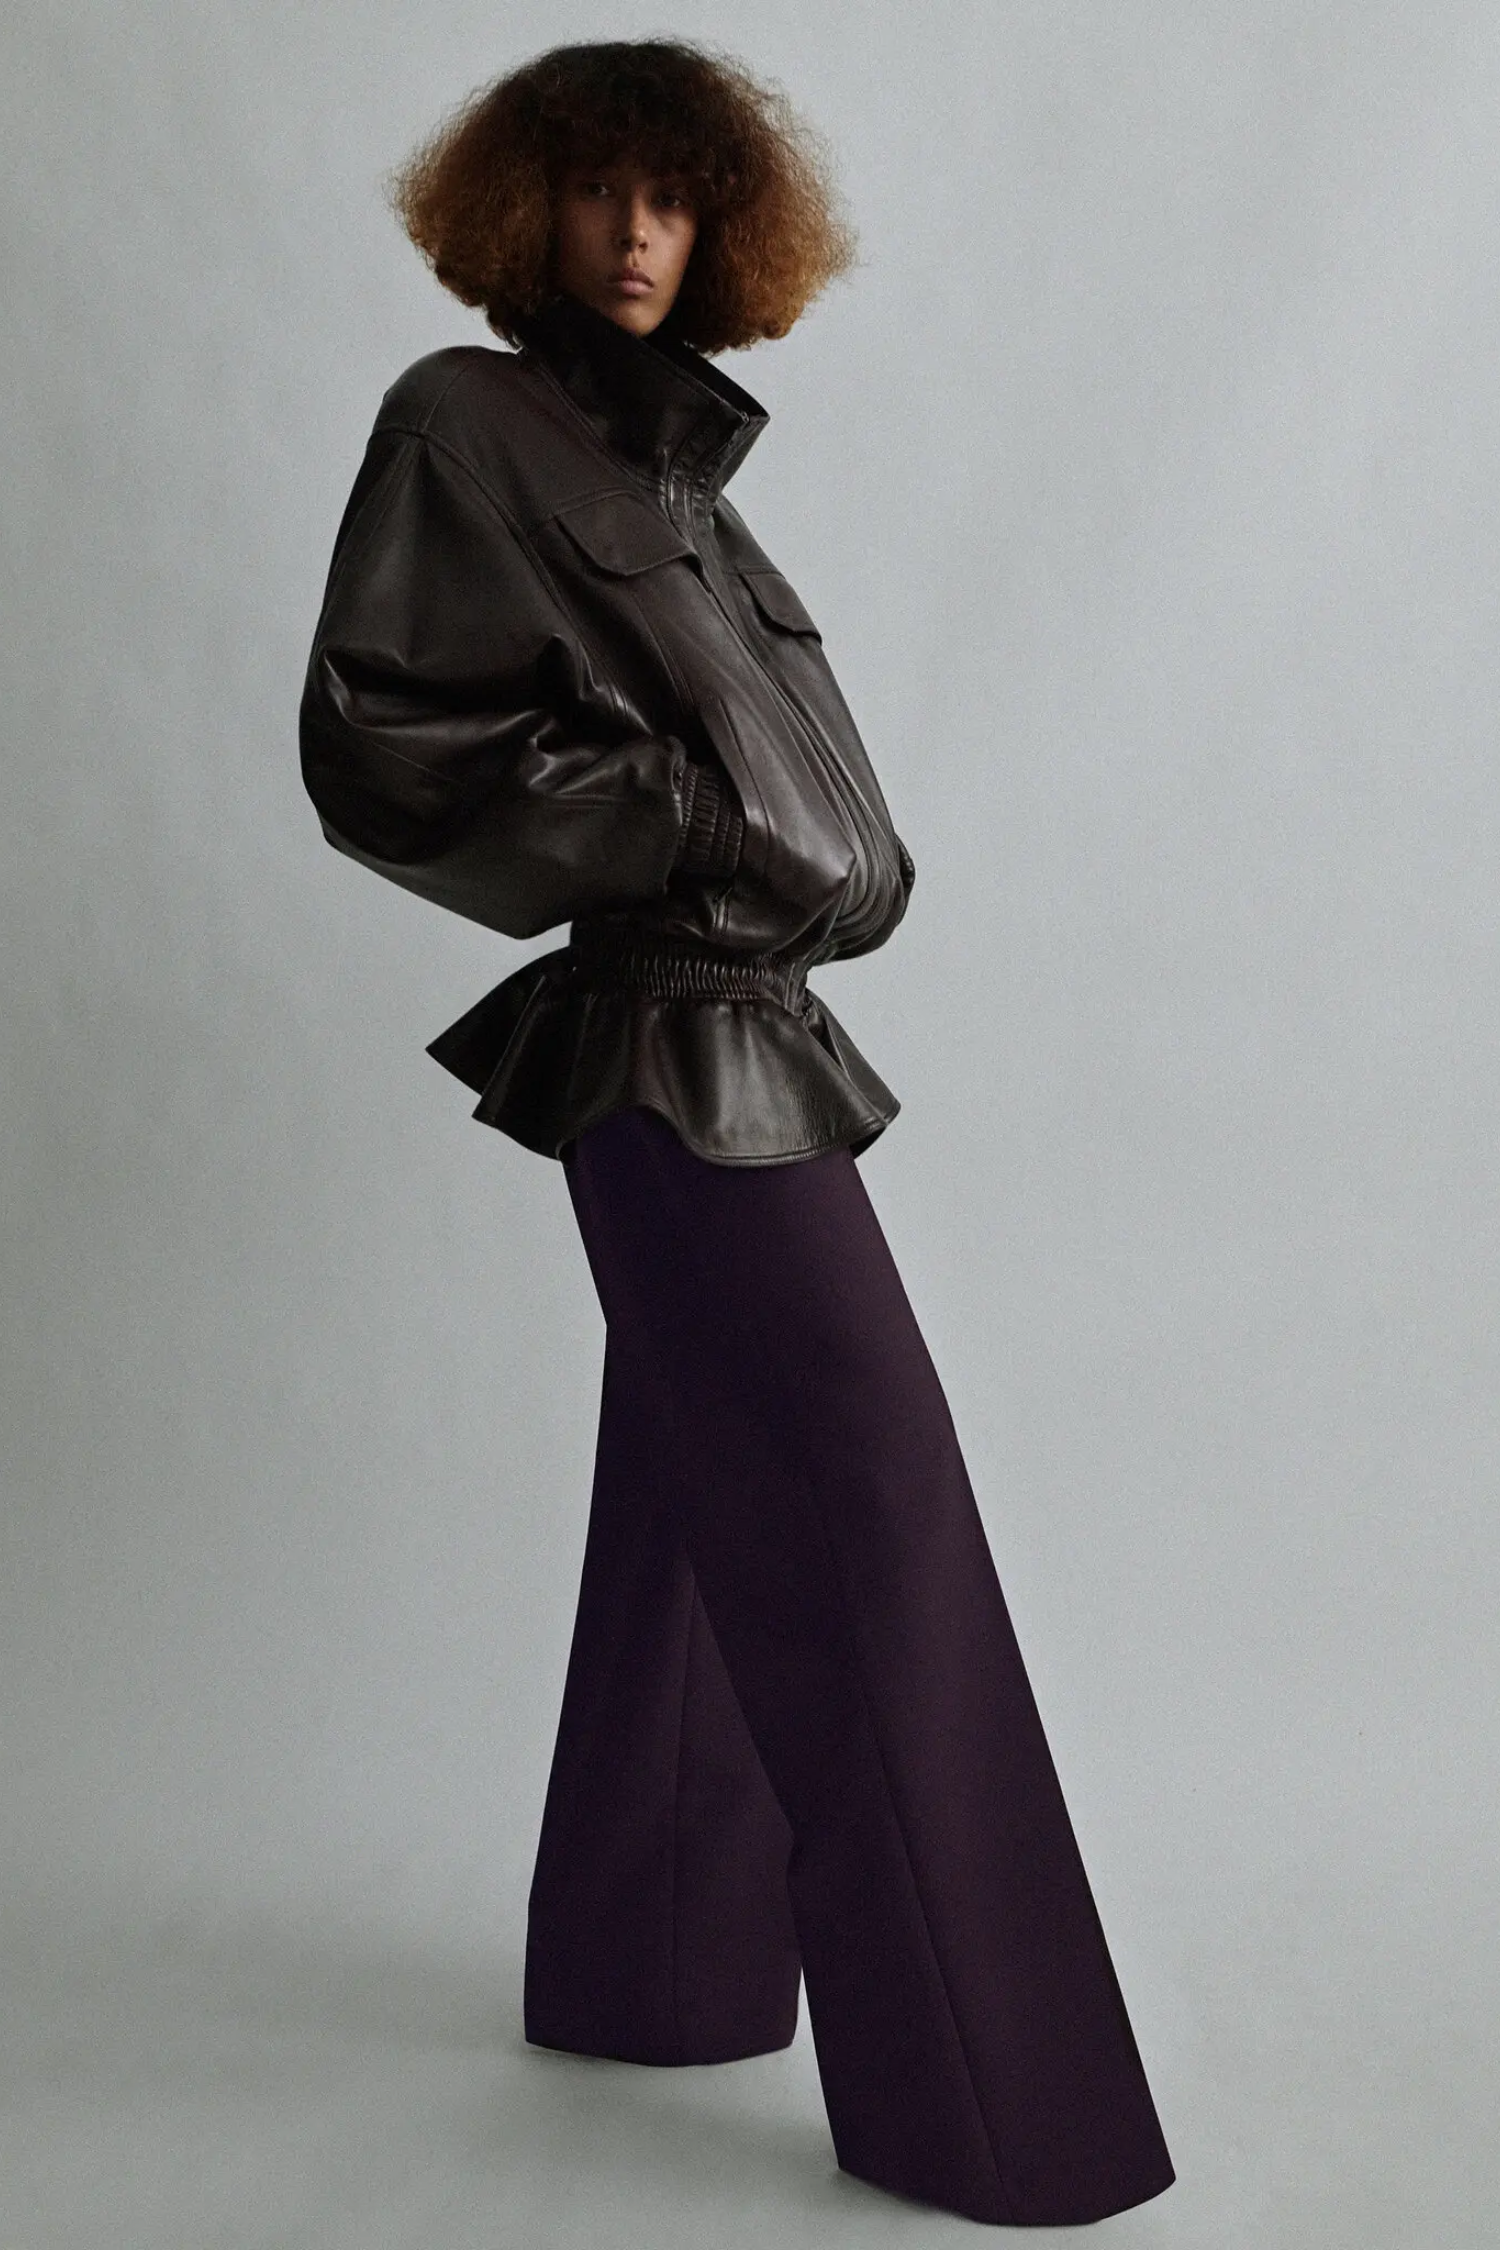 The second Phoebe Philo drop continues to highlight leather outerwear, as in this dropped waist leather jacket, shown with oversize berry-colored wool trousers.